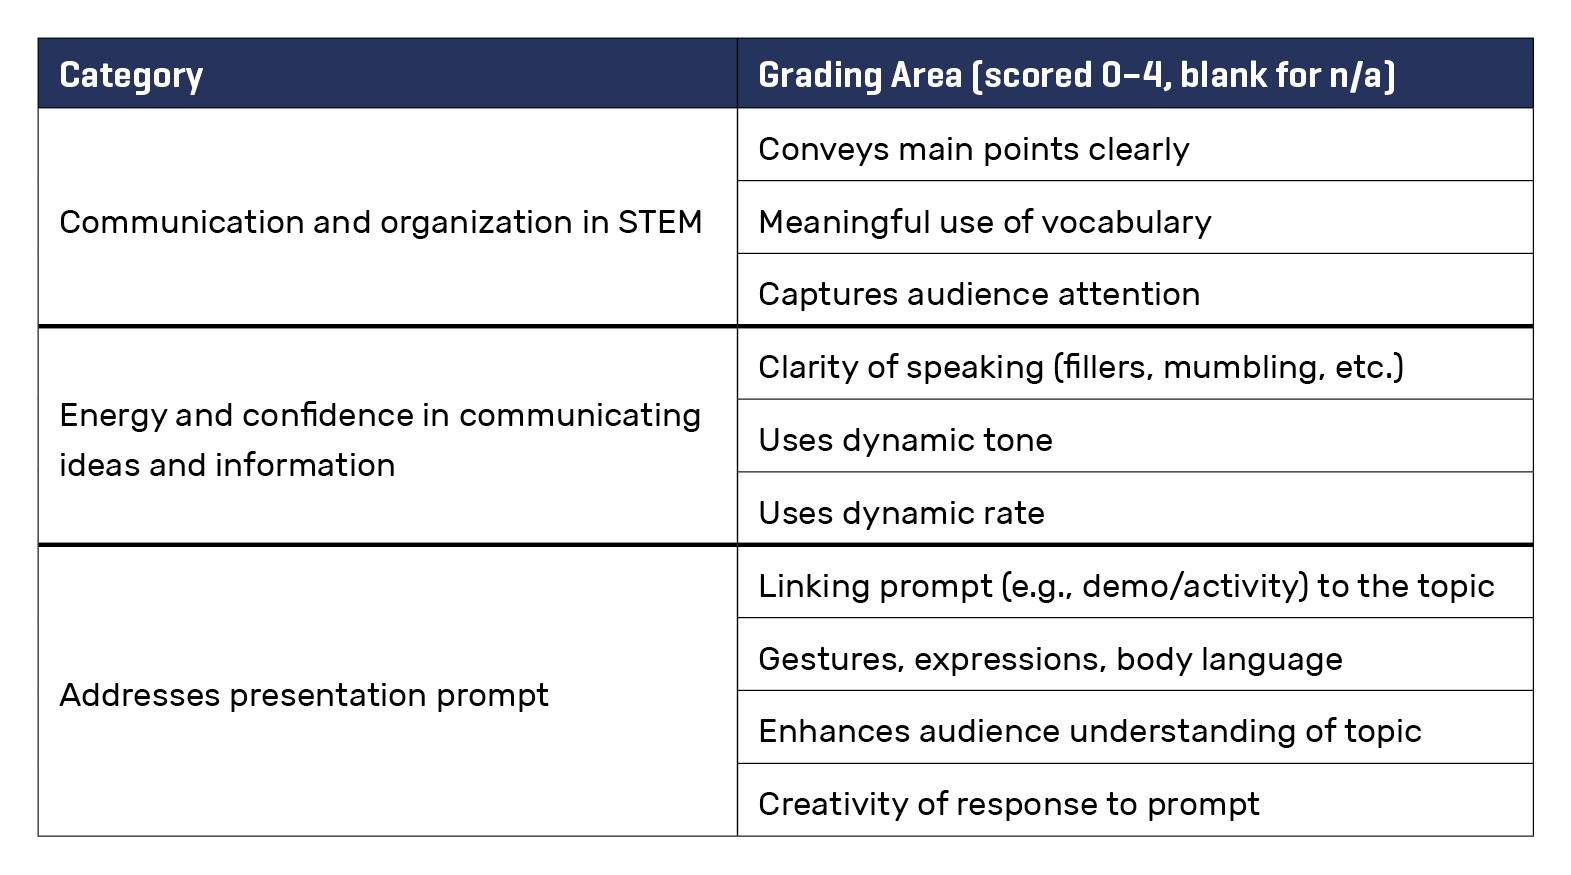 Table includes two column headings, Category and Grading Area (scored 0-4, blank for n/a). By row, the top category is communication and organization in STEM with three grading areas: conveys points clearly, meaningful use of vocabulary, and captures audience attention. The center category is energy and confidence in communicating ideas and information with three grading areas: clarity of speaking, uses dynamic tone, and dynamic rate. The bottom category addresses presentation prompt.